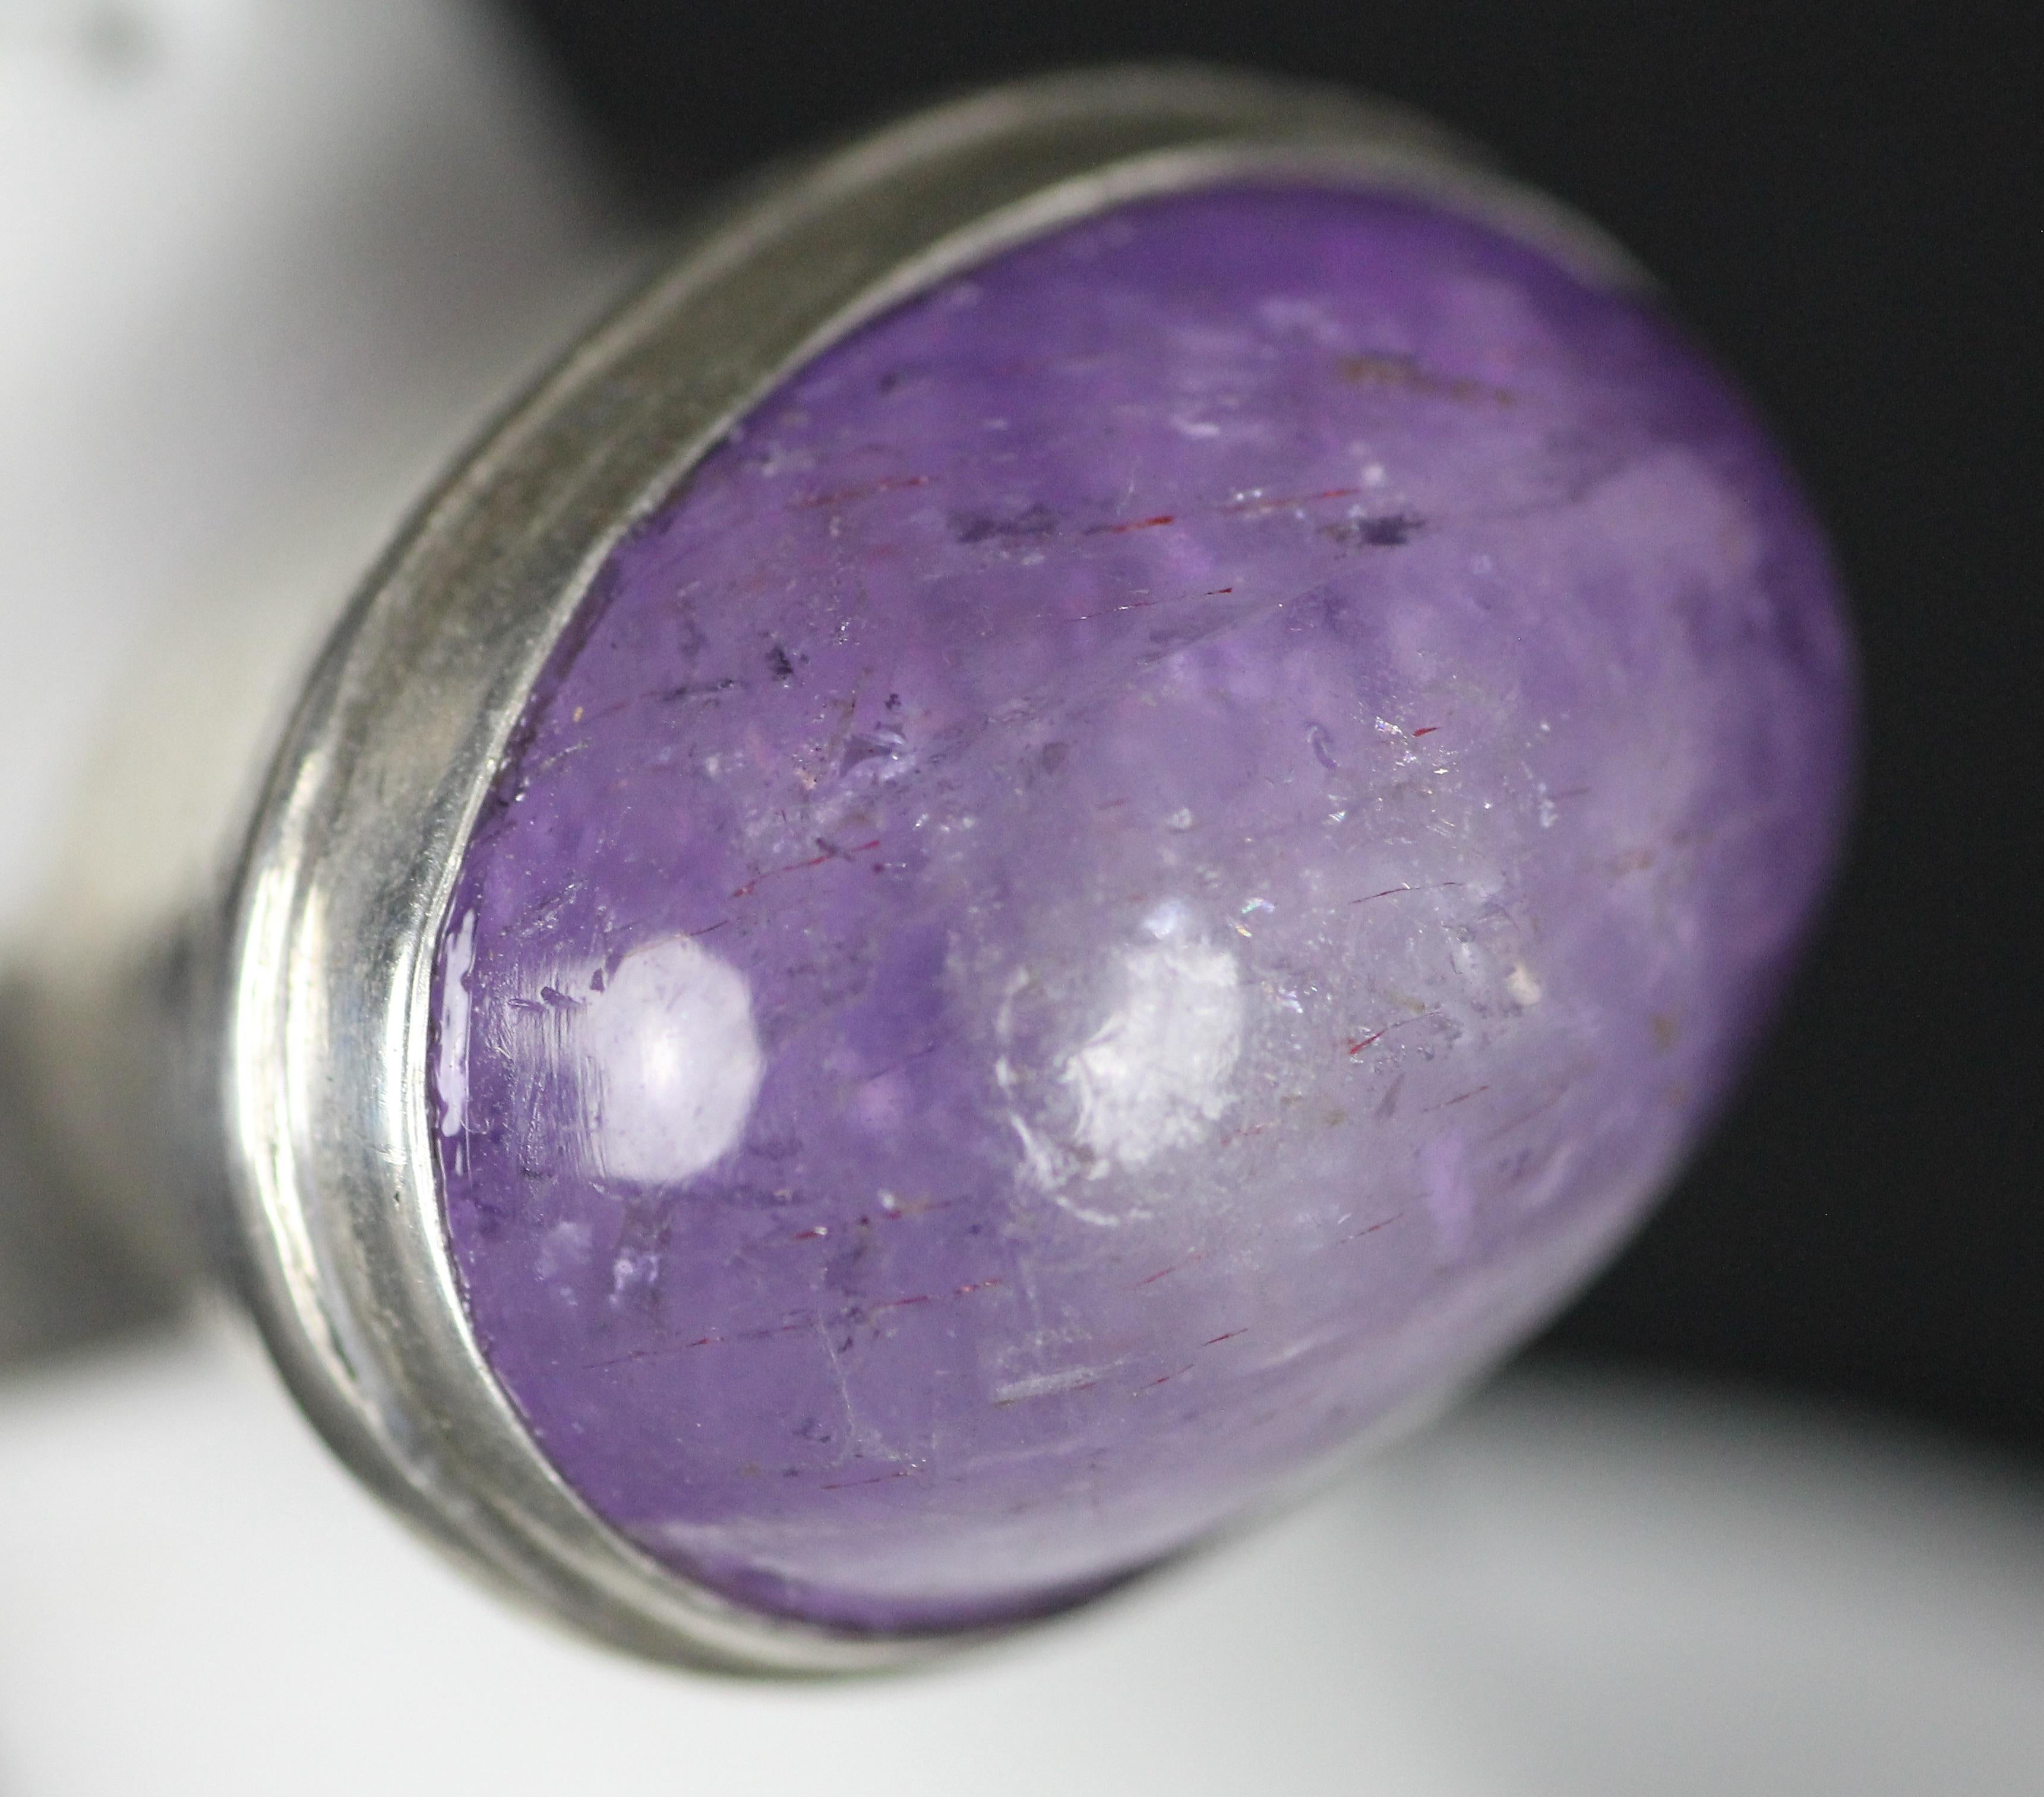 Ring size 15mm. US size 4 1/4. 
Amethyst size, 2x1.5cm.
Some minor scratches and some small dents.

Bengt Liljedahl is a highly regarded silversmith who is represented in Moderna muséet and Röhsska muséet and was once an apprentice to Torun